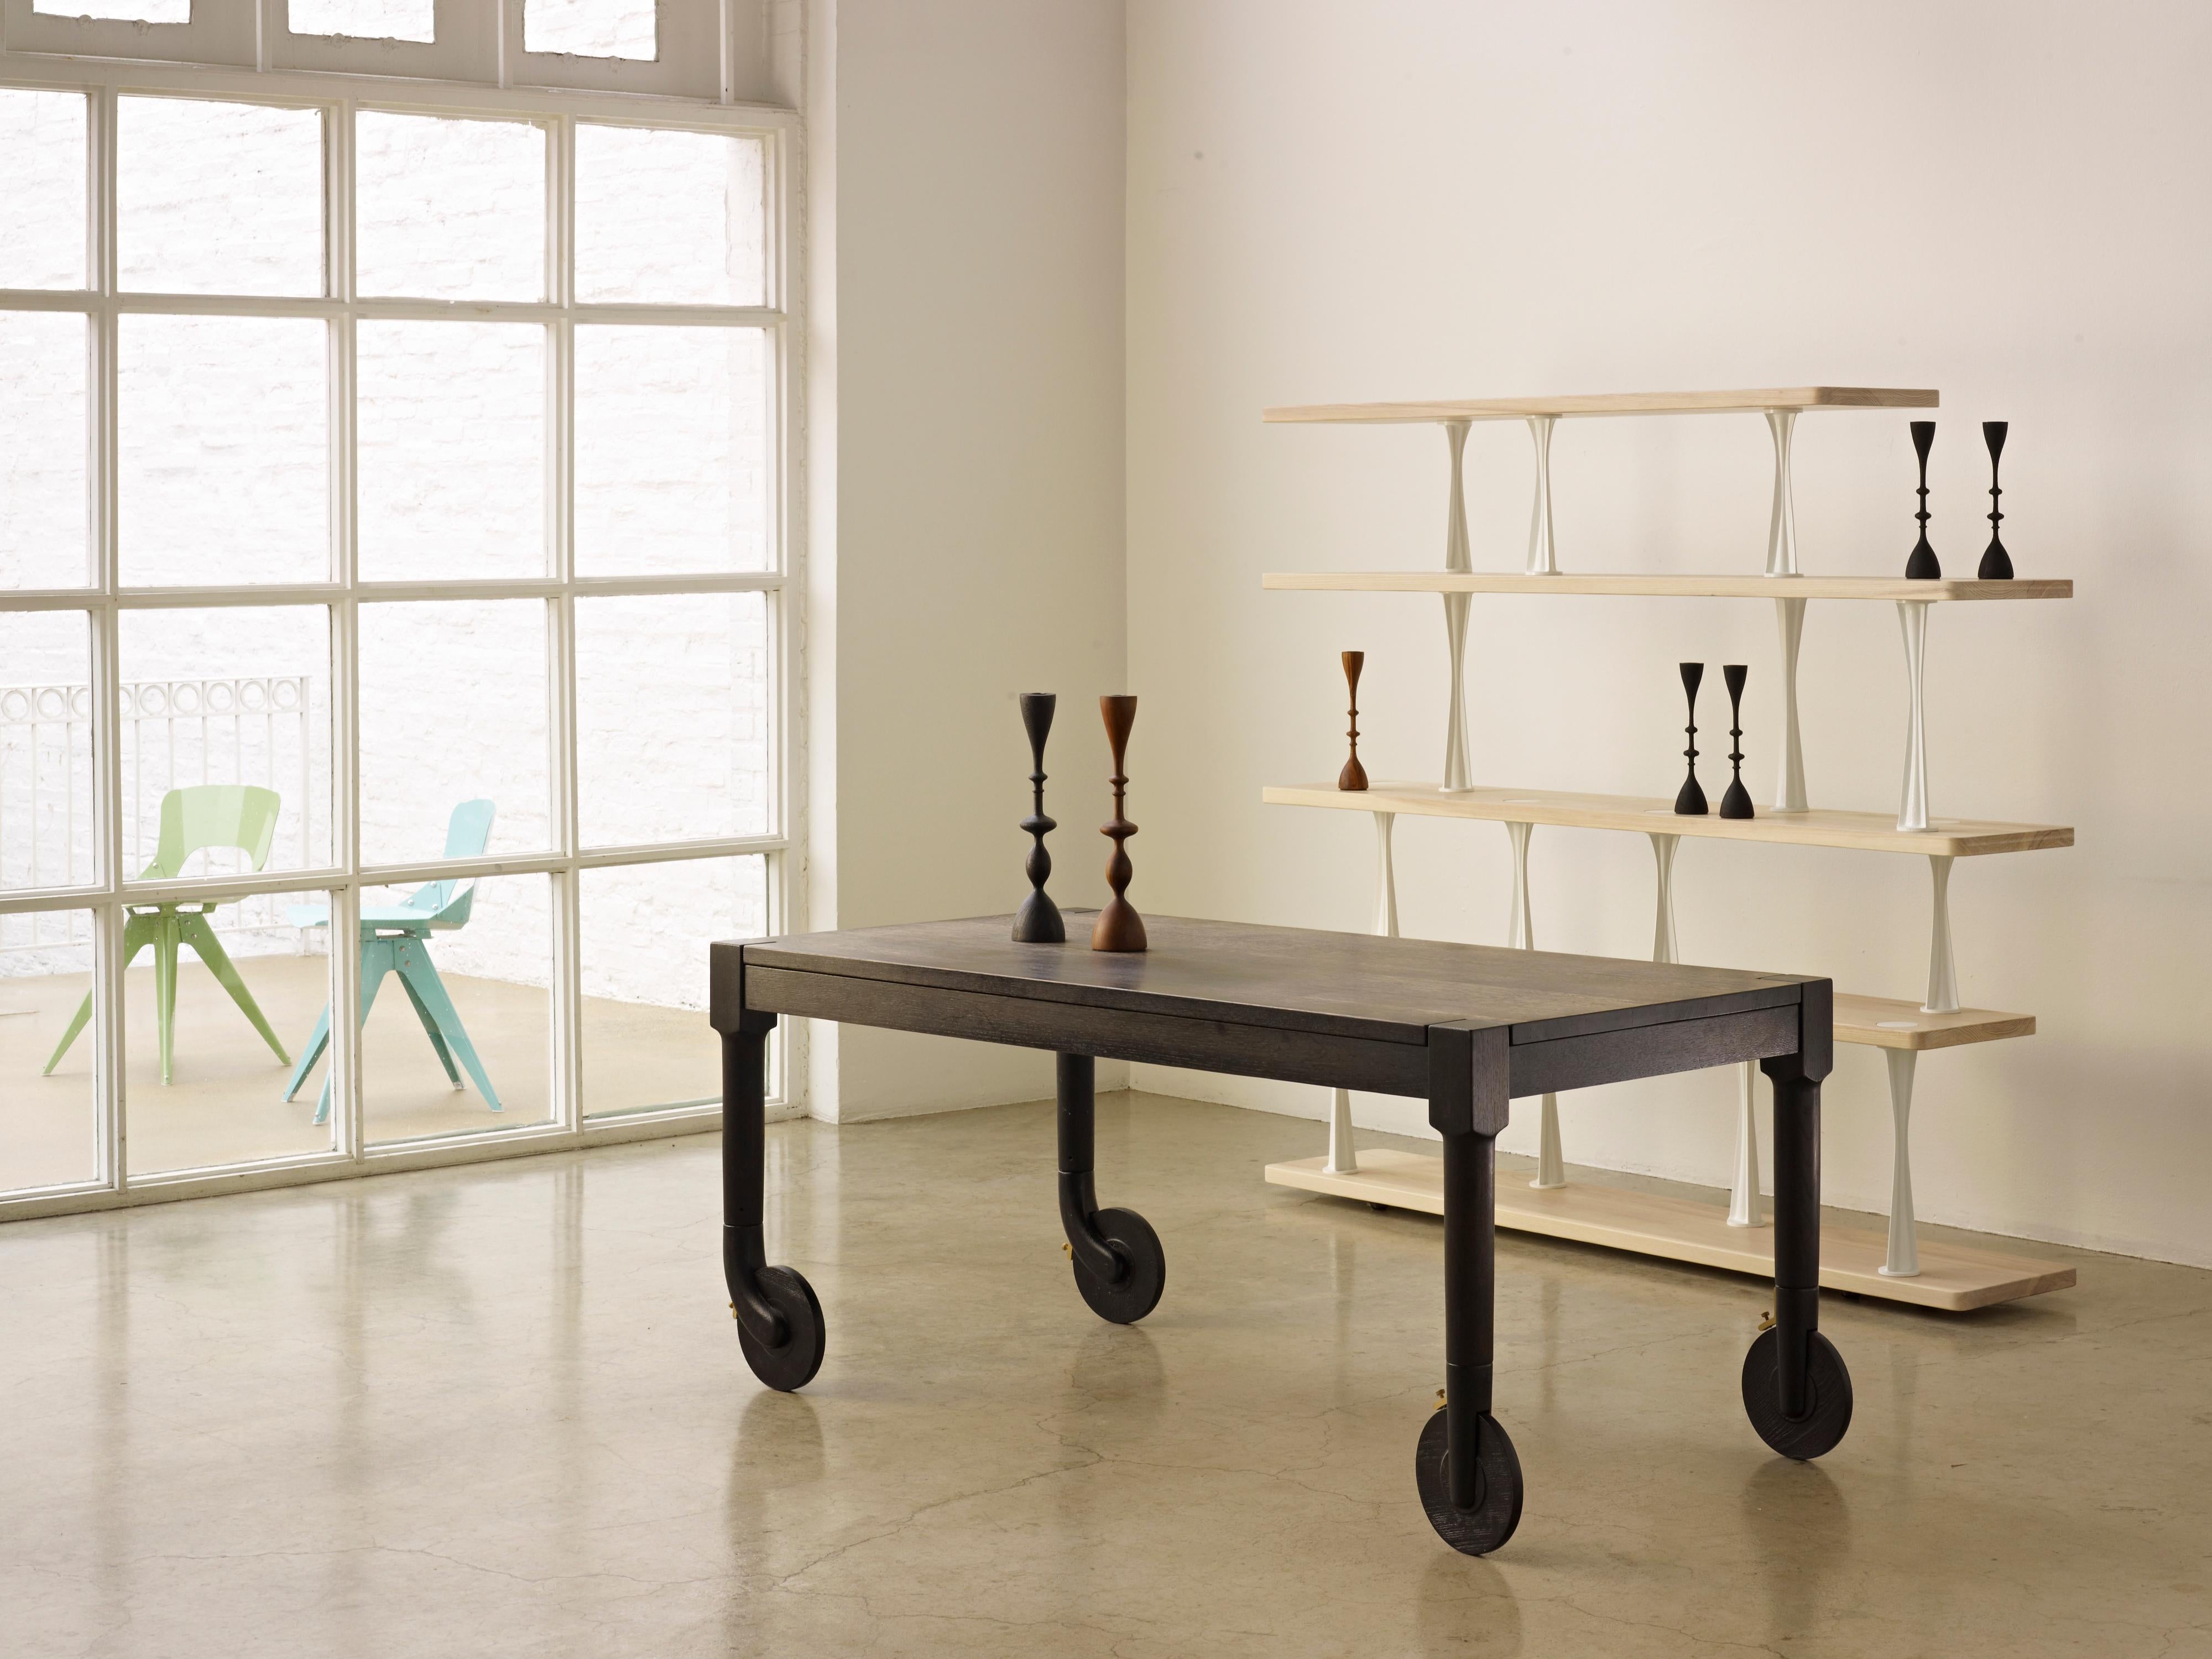 The Machine leg shelving System is a versatile design that pairs fully customizable solid wood shelves with sturdy cast aluminum vertical supports. The shelves are made to order at our studio in Chicago and are available in an extensive range of